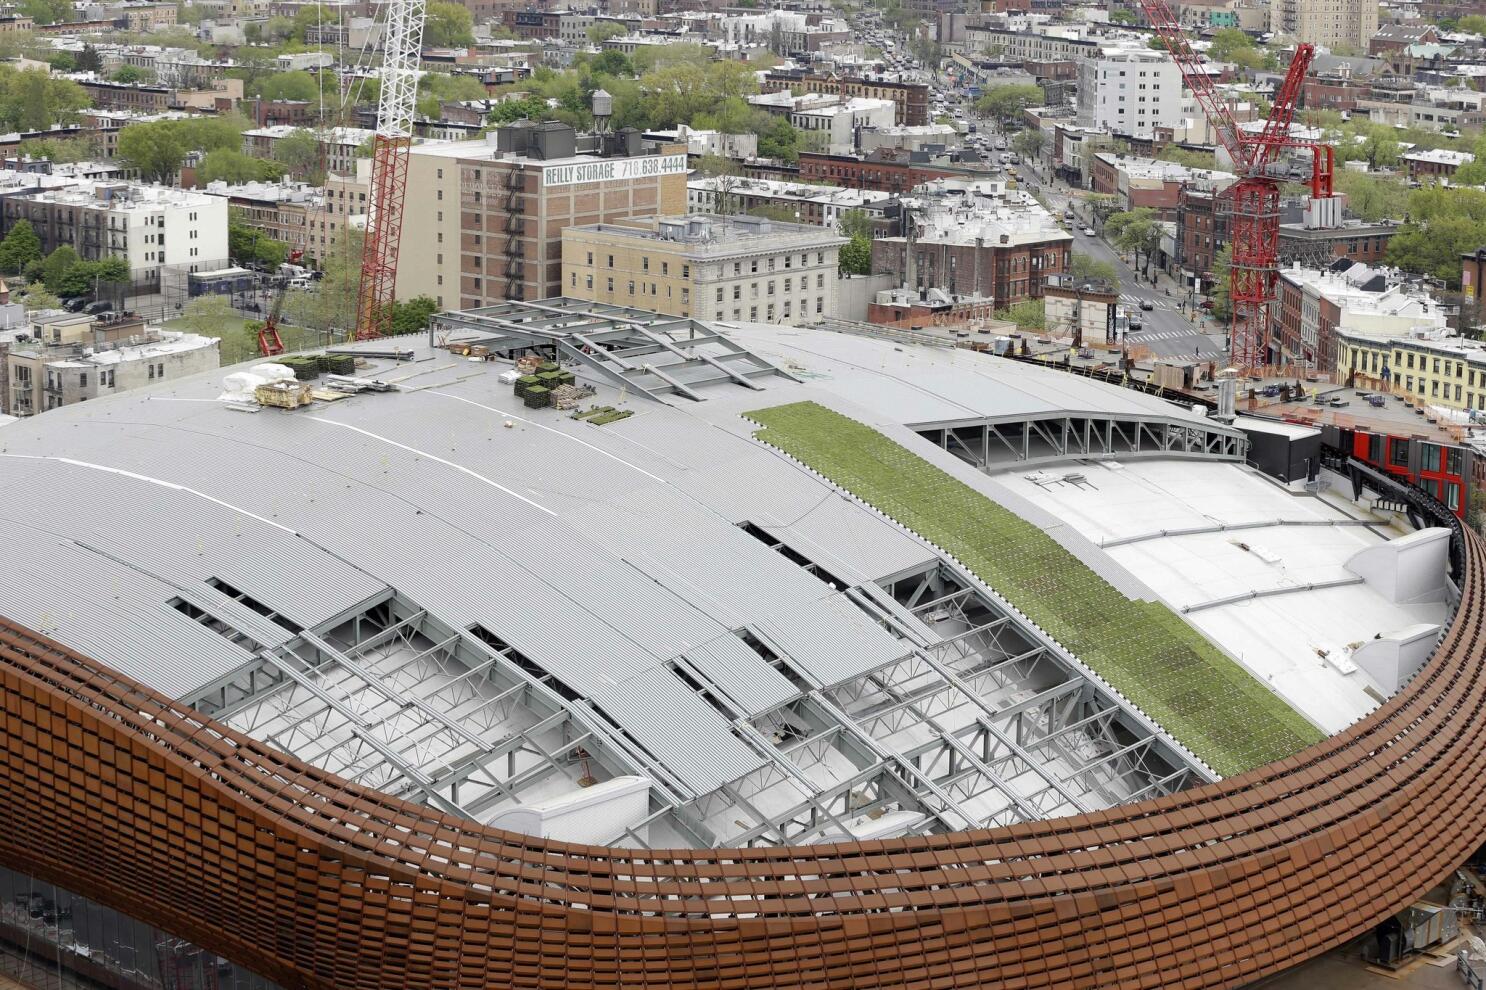 From green roof to massive towers, Barclays Center look about to